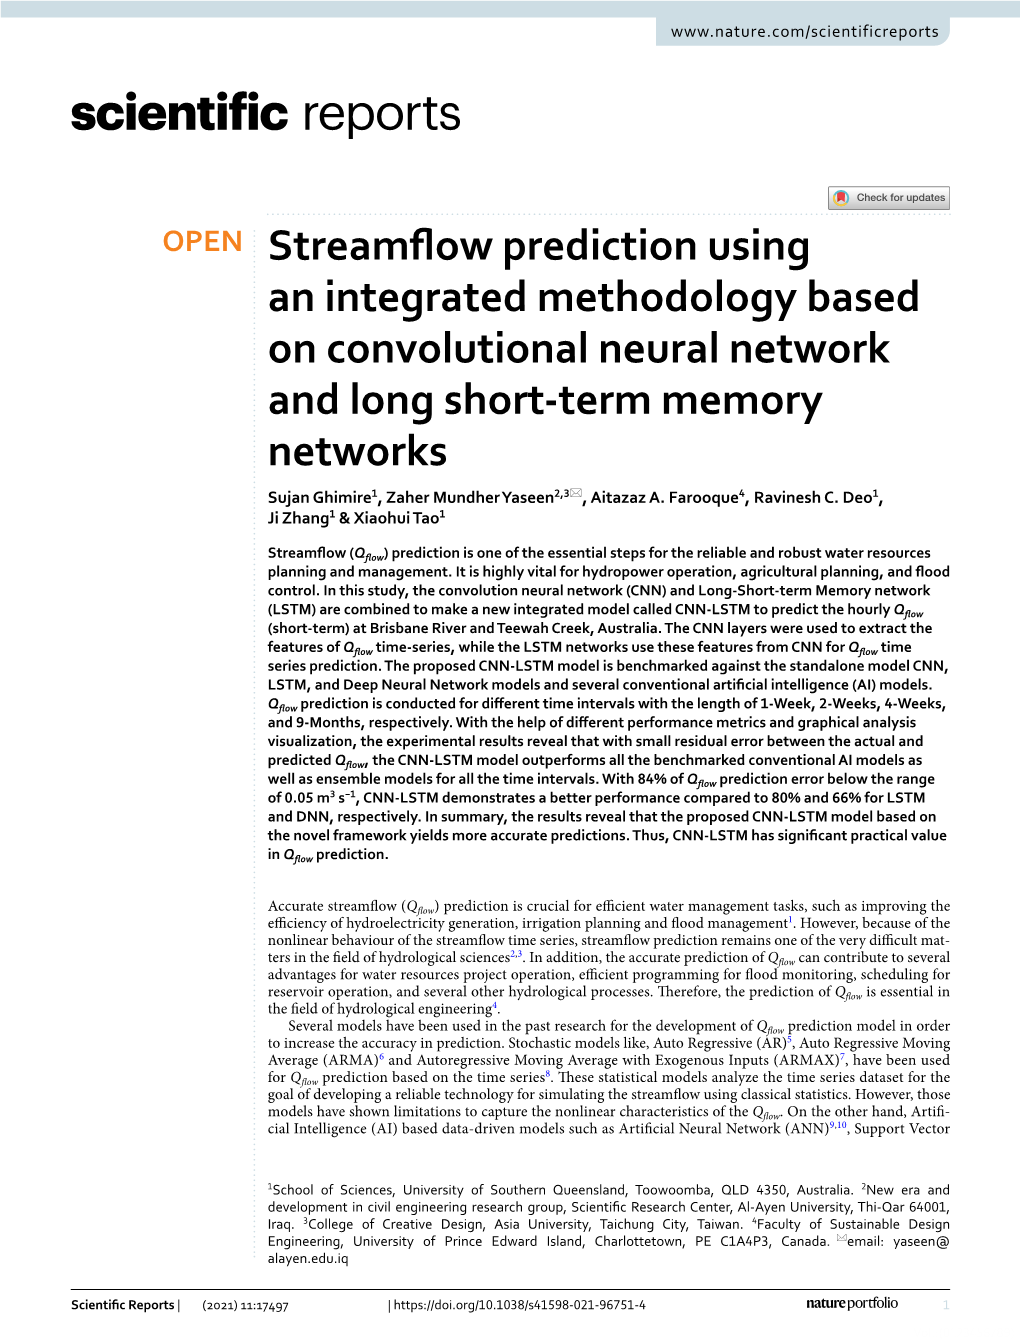 Streamflow Prediction Using an Integrated Methodology Based On